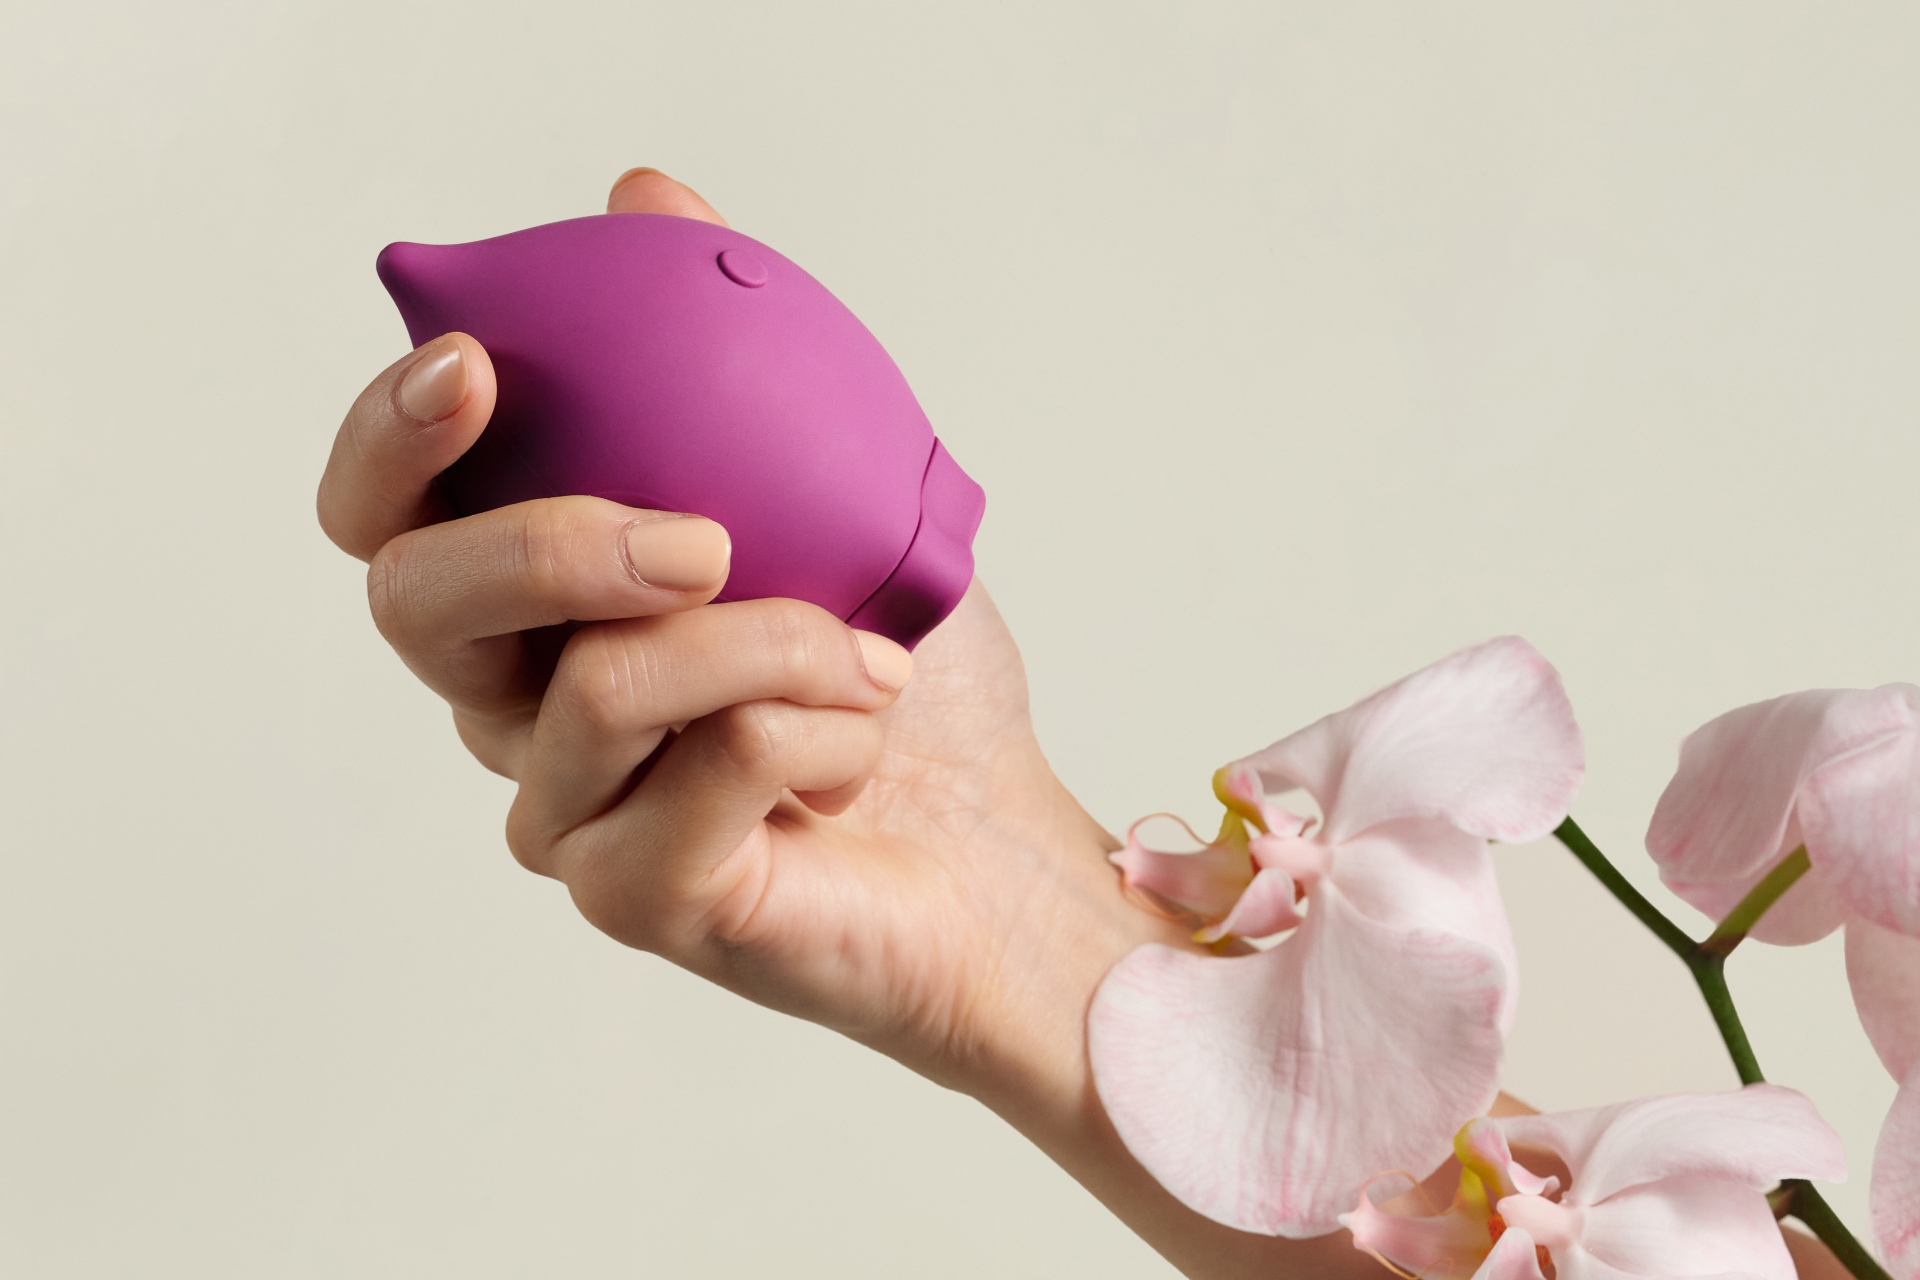 The Poet, Smile Makers’s air pulse stimulator. Photo: Smile Makers
